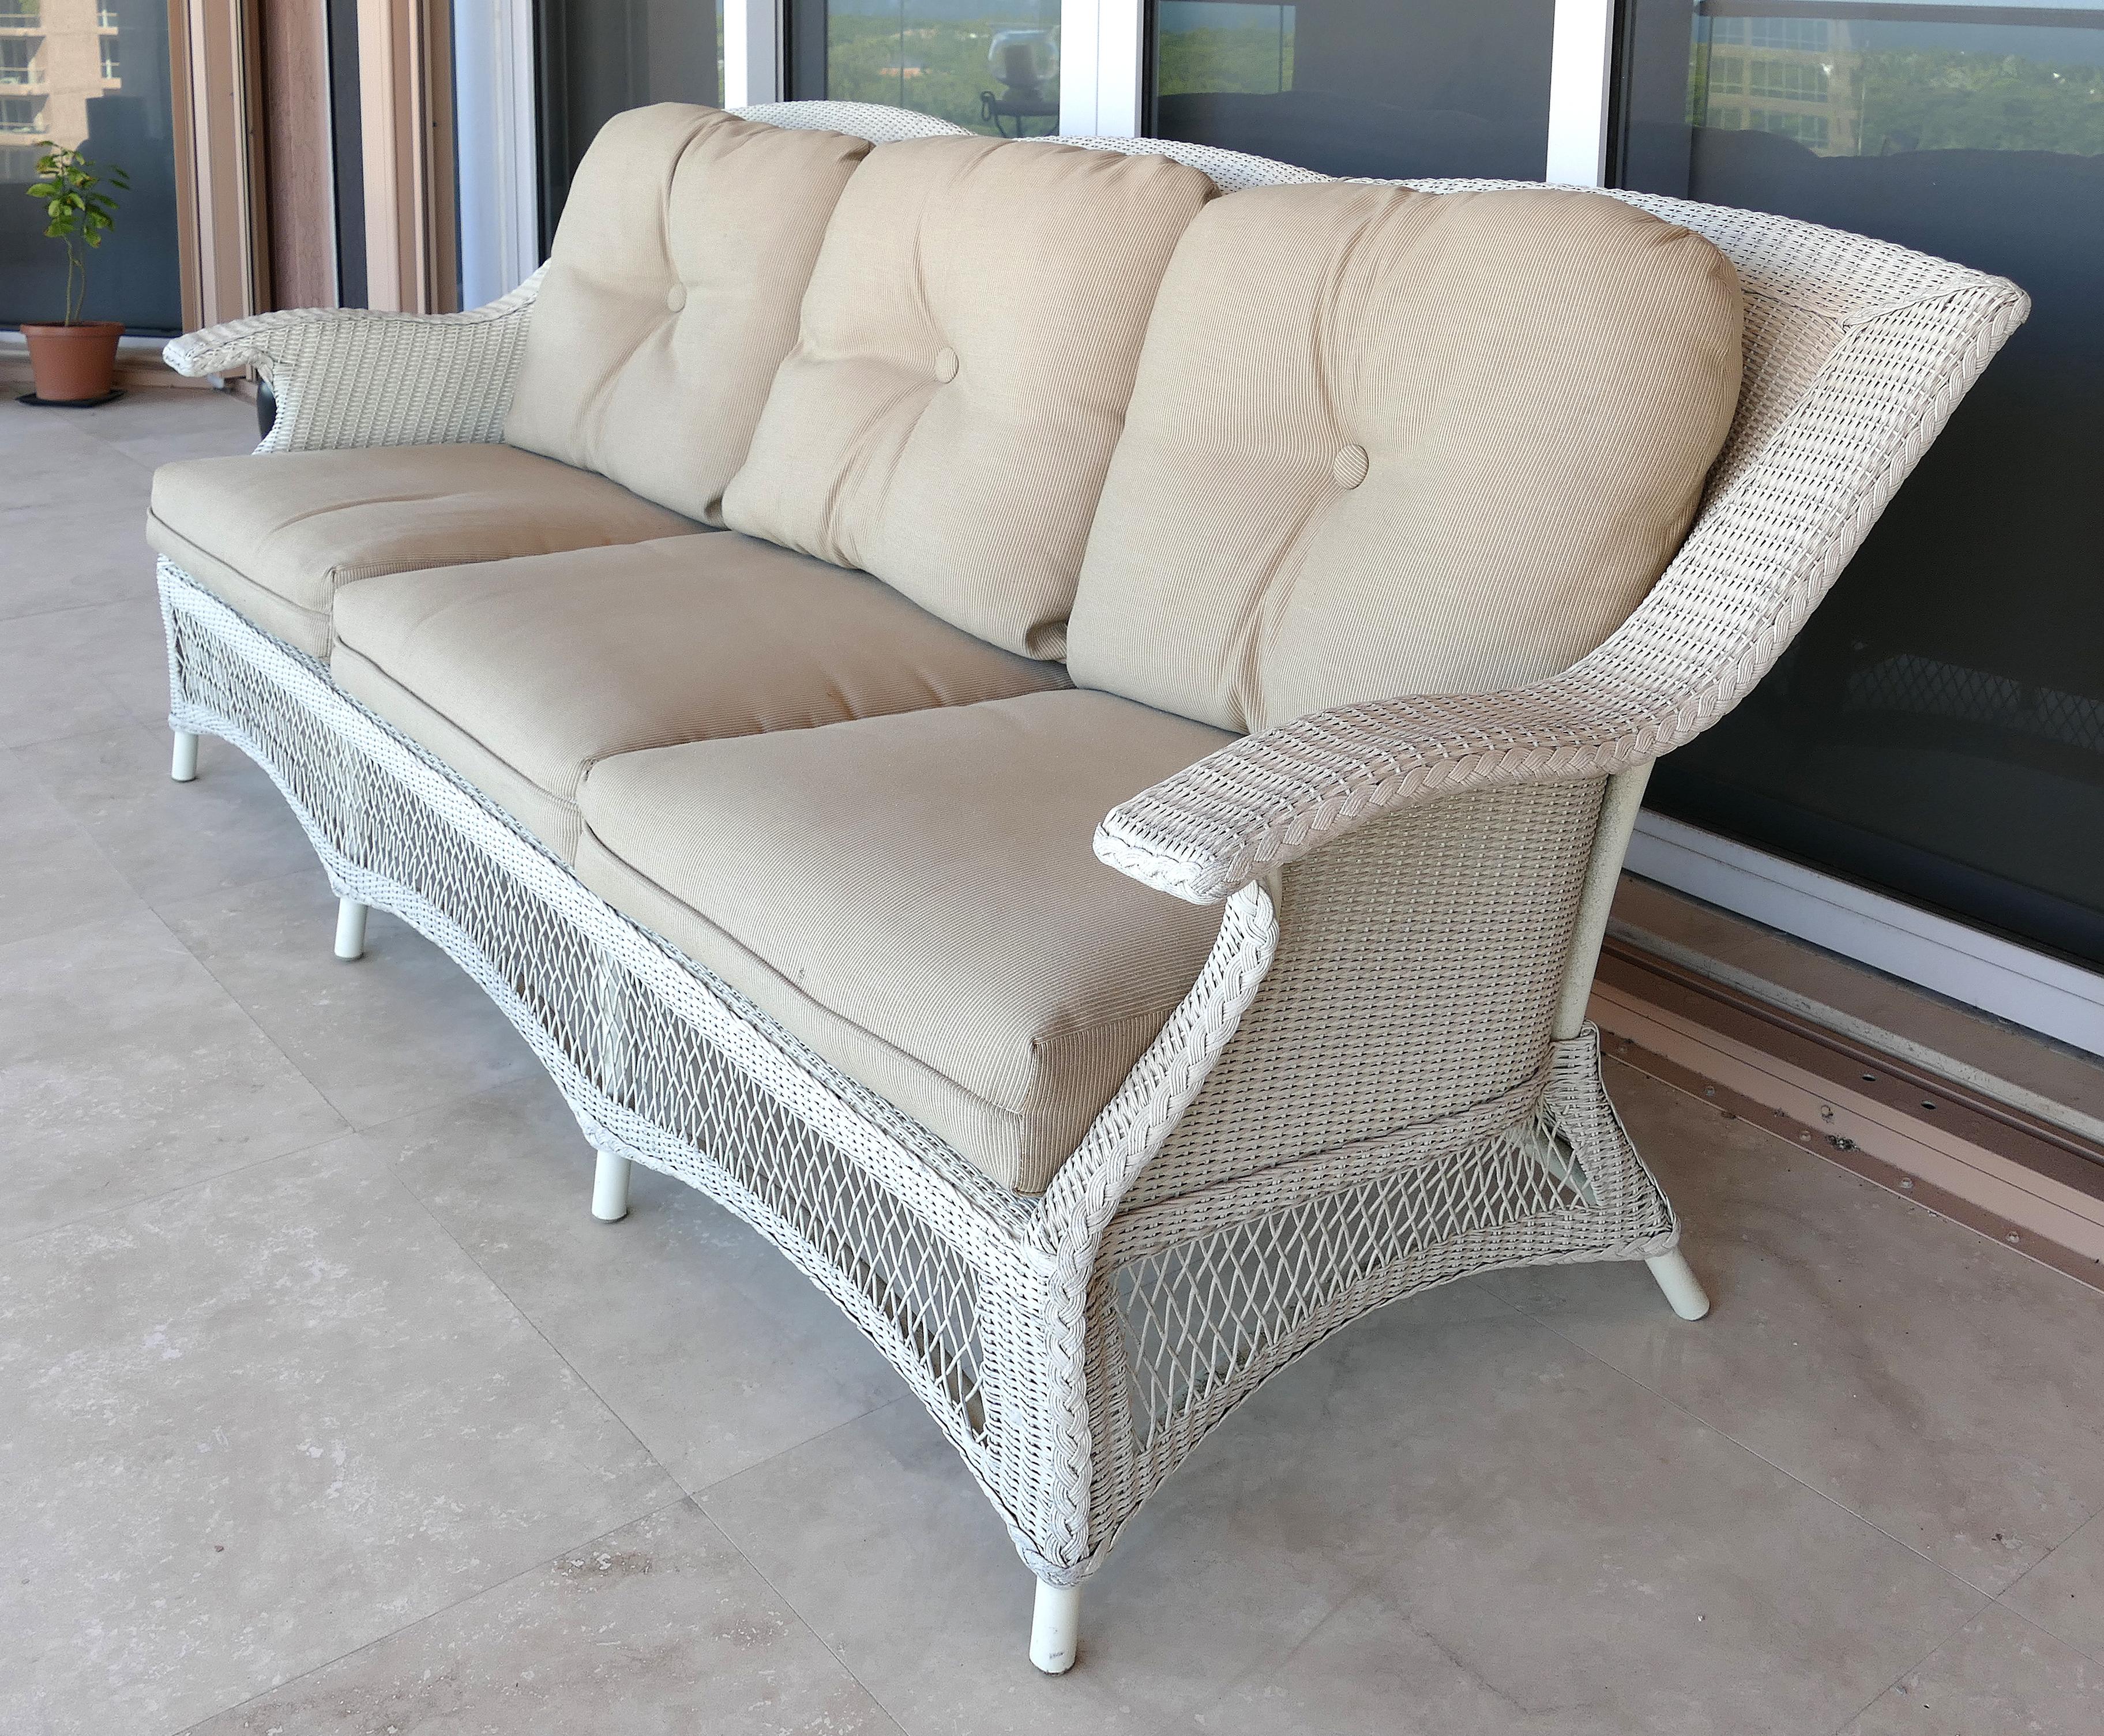 Traditionally Styled Wicker Sofa

Offered for sale is a modern woven wicker furniture 3-seat sofa with loose cushions. The traditionally styled sofa is reinforced with metal framing which supports the wicker. The sofa has been kept out of the